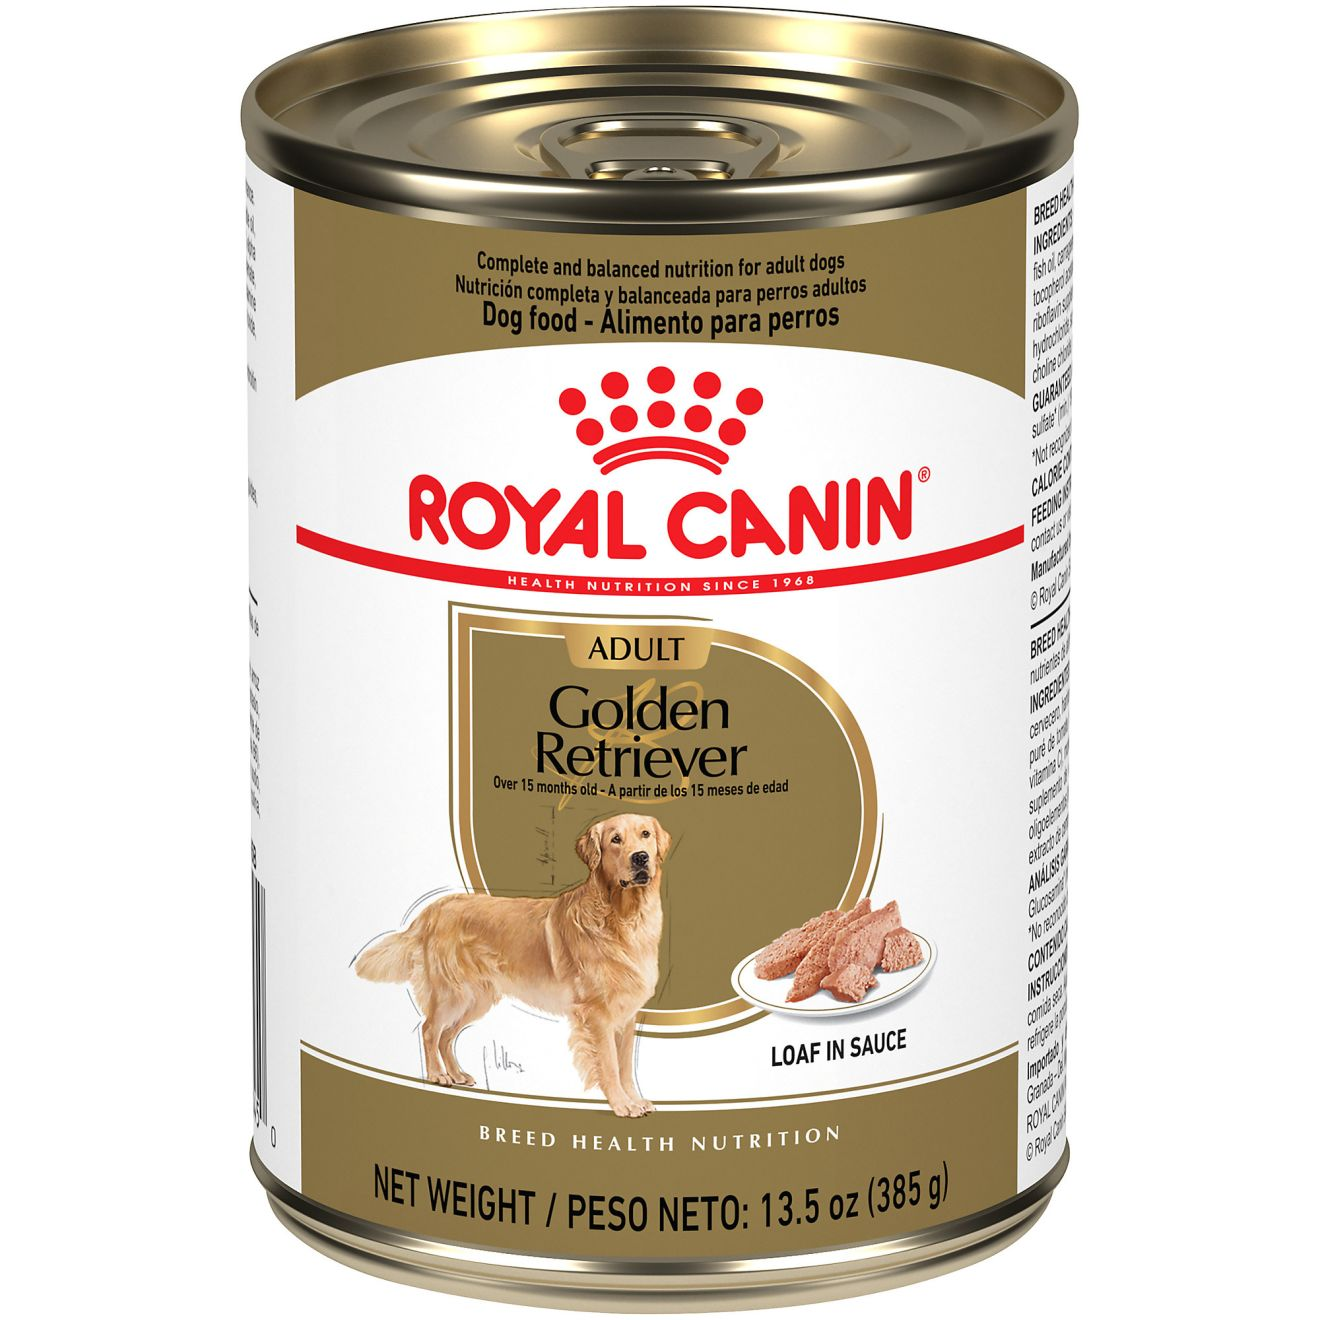 Golden Retriever Adult Loaf in Sauce Canned Dog Food